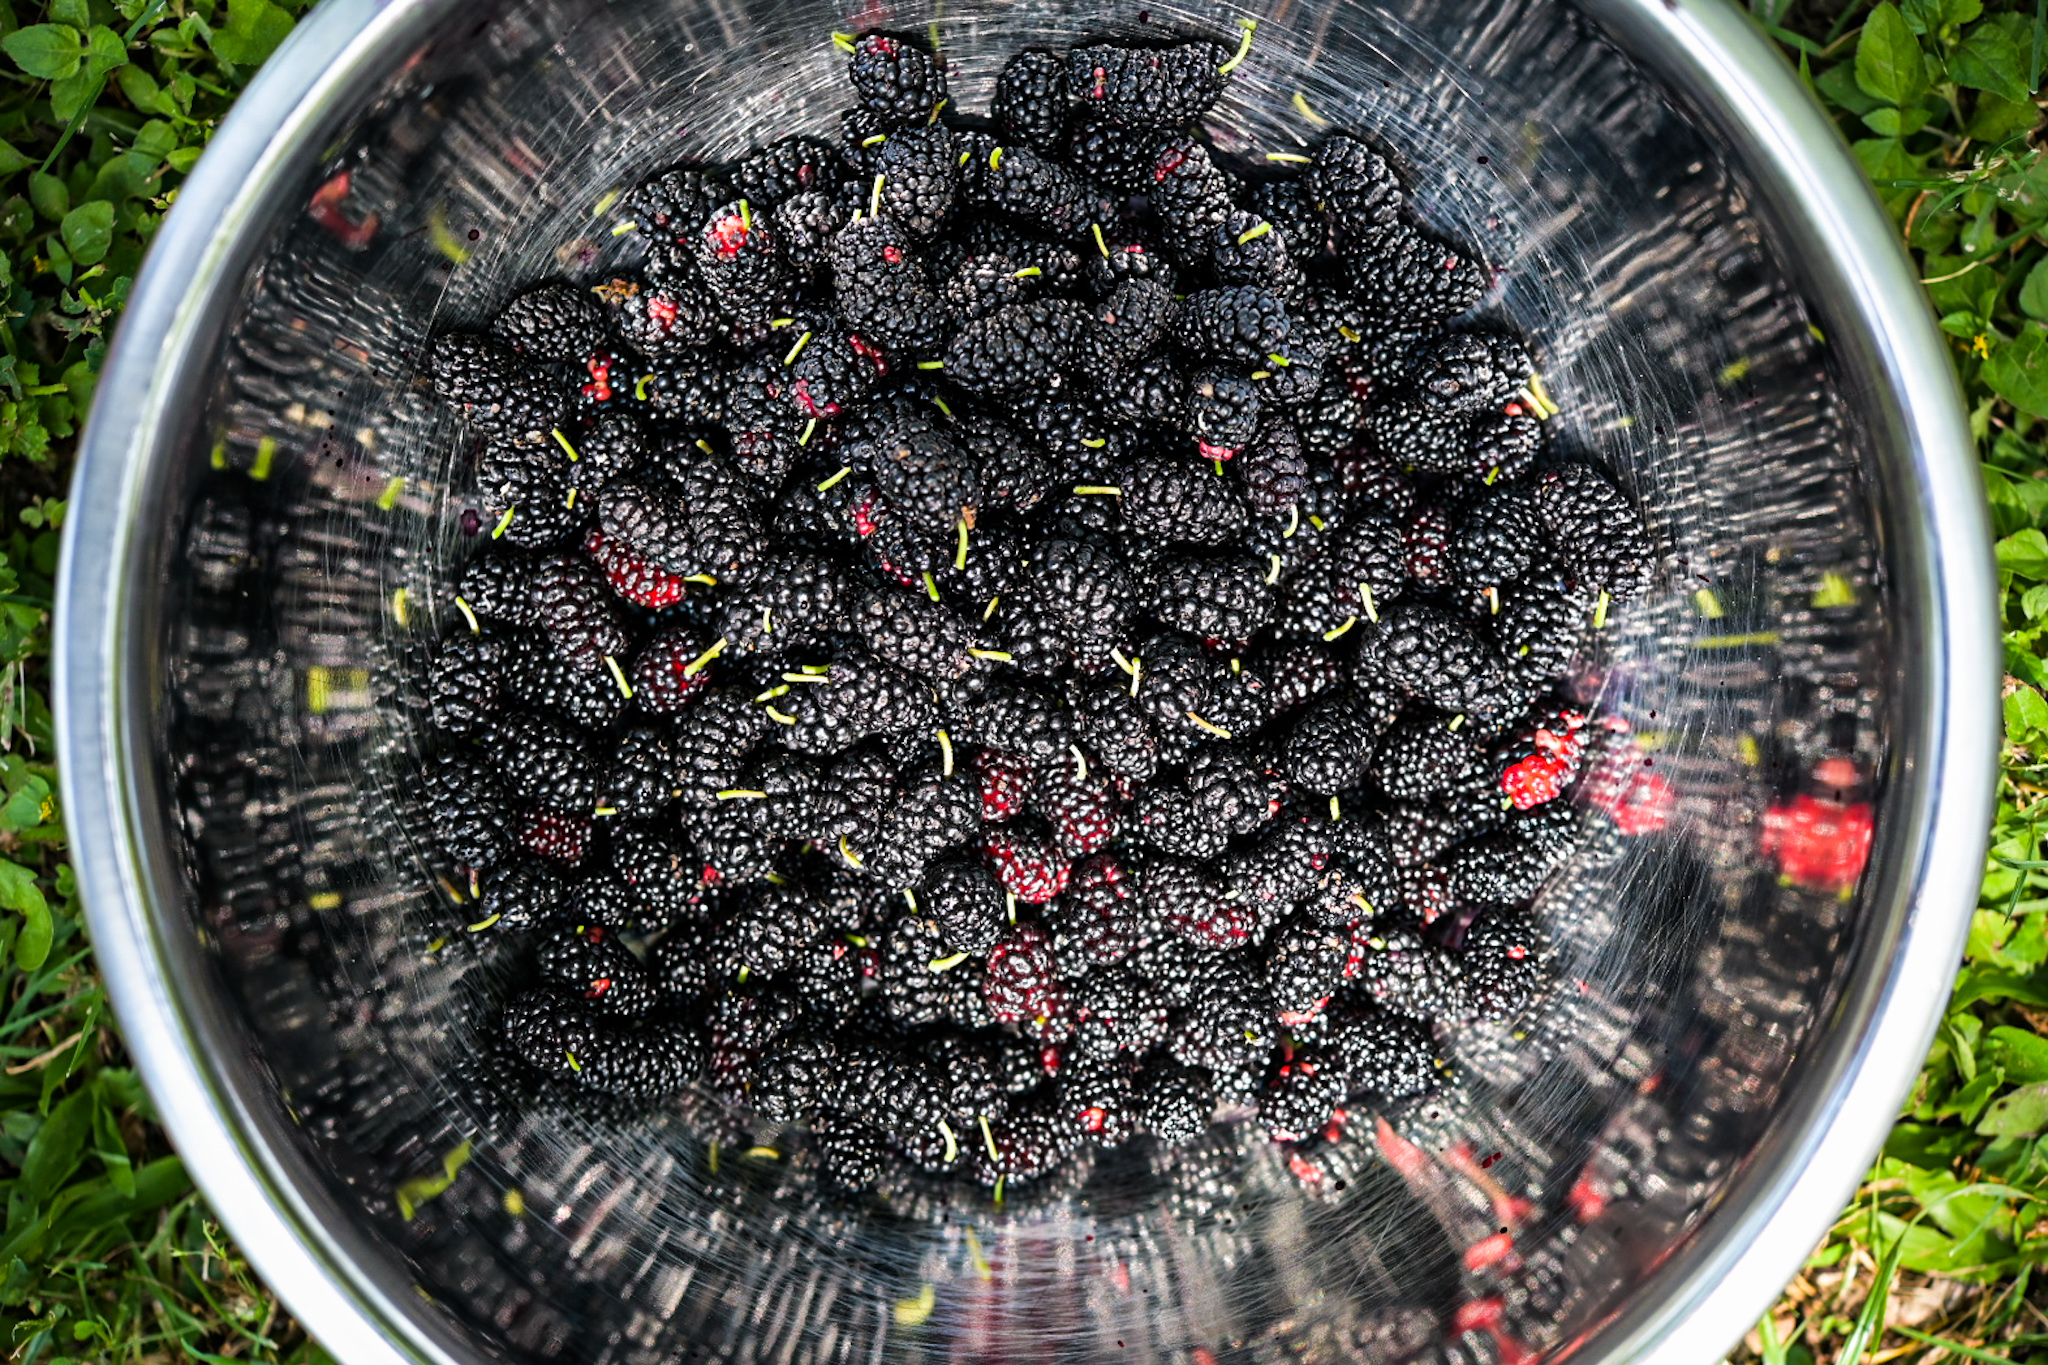 Foraged mulberries from Central City, New Orleans